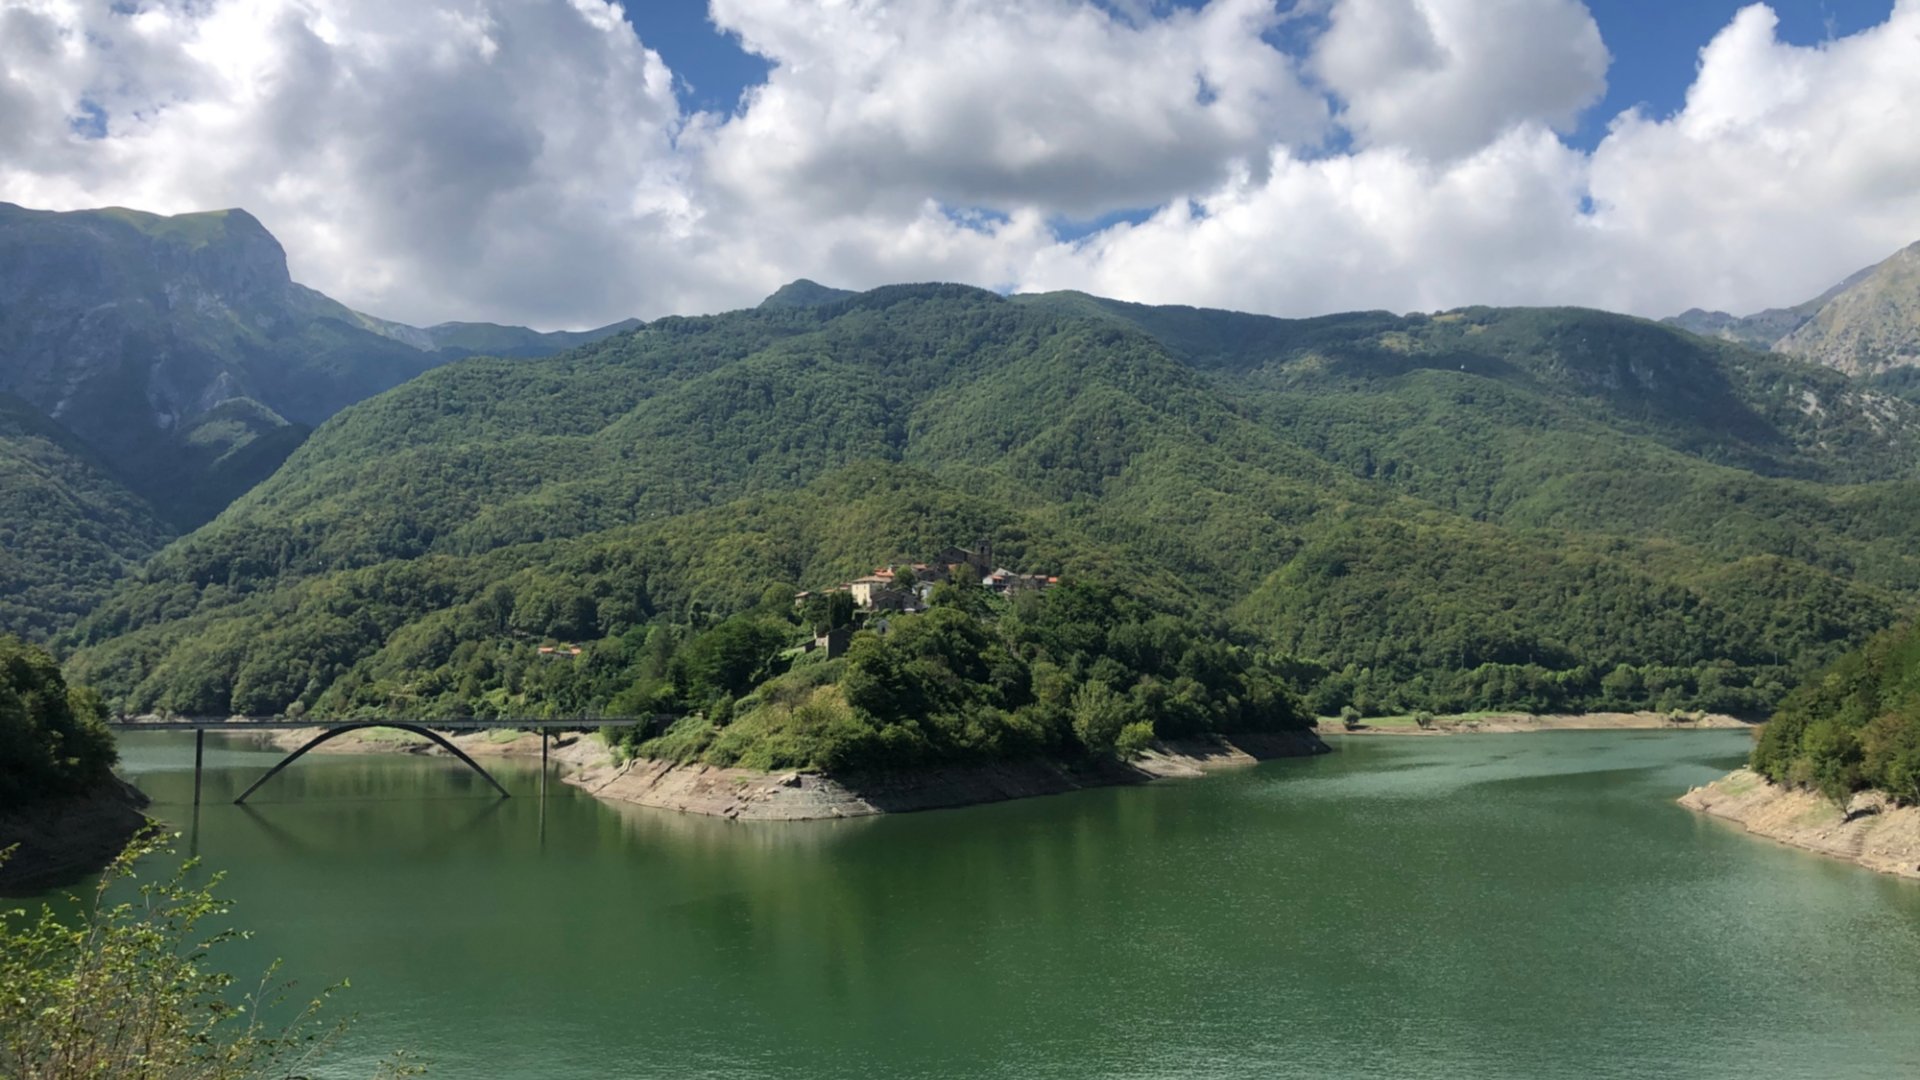 The lake of Vagli, one of the most important in the Garfagnana area Tuscany